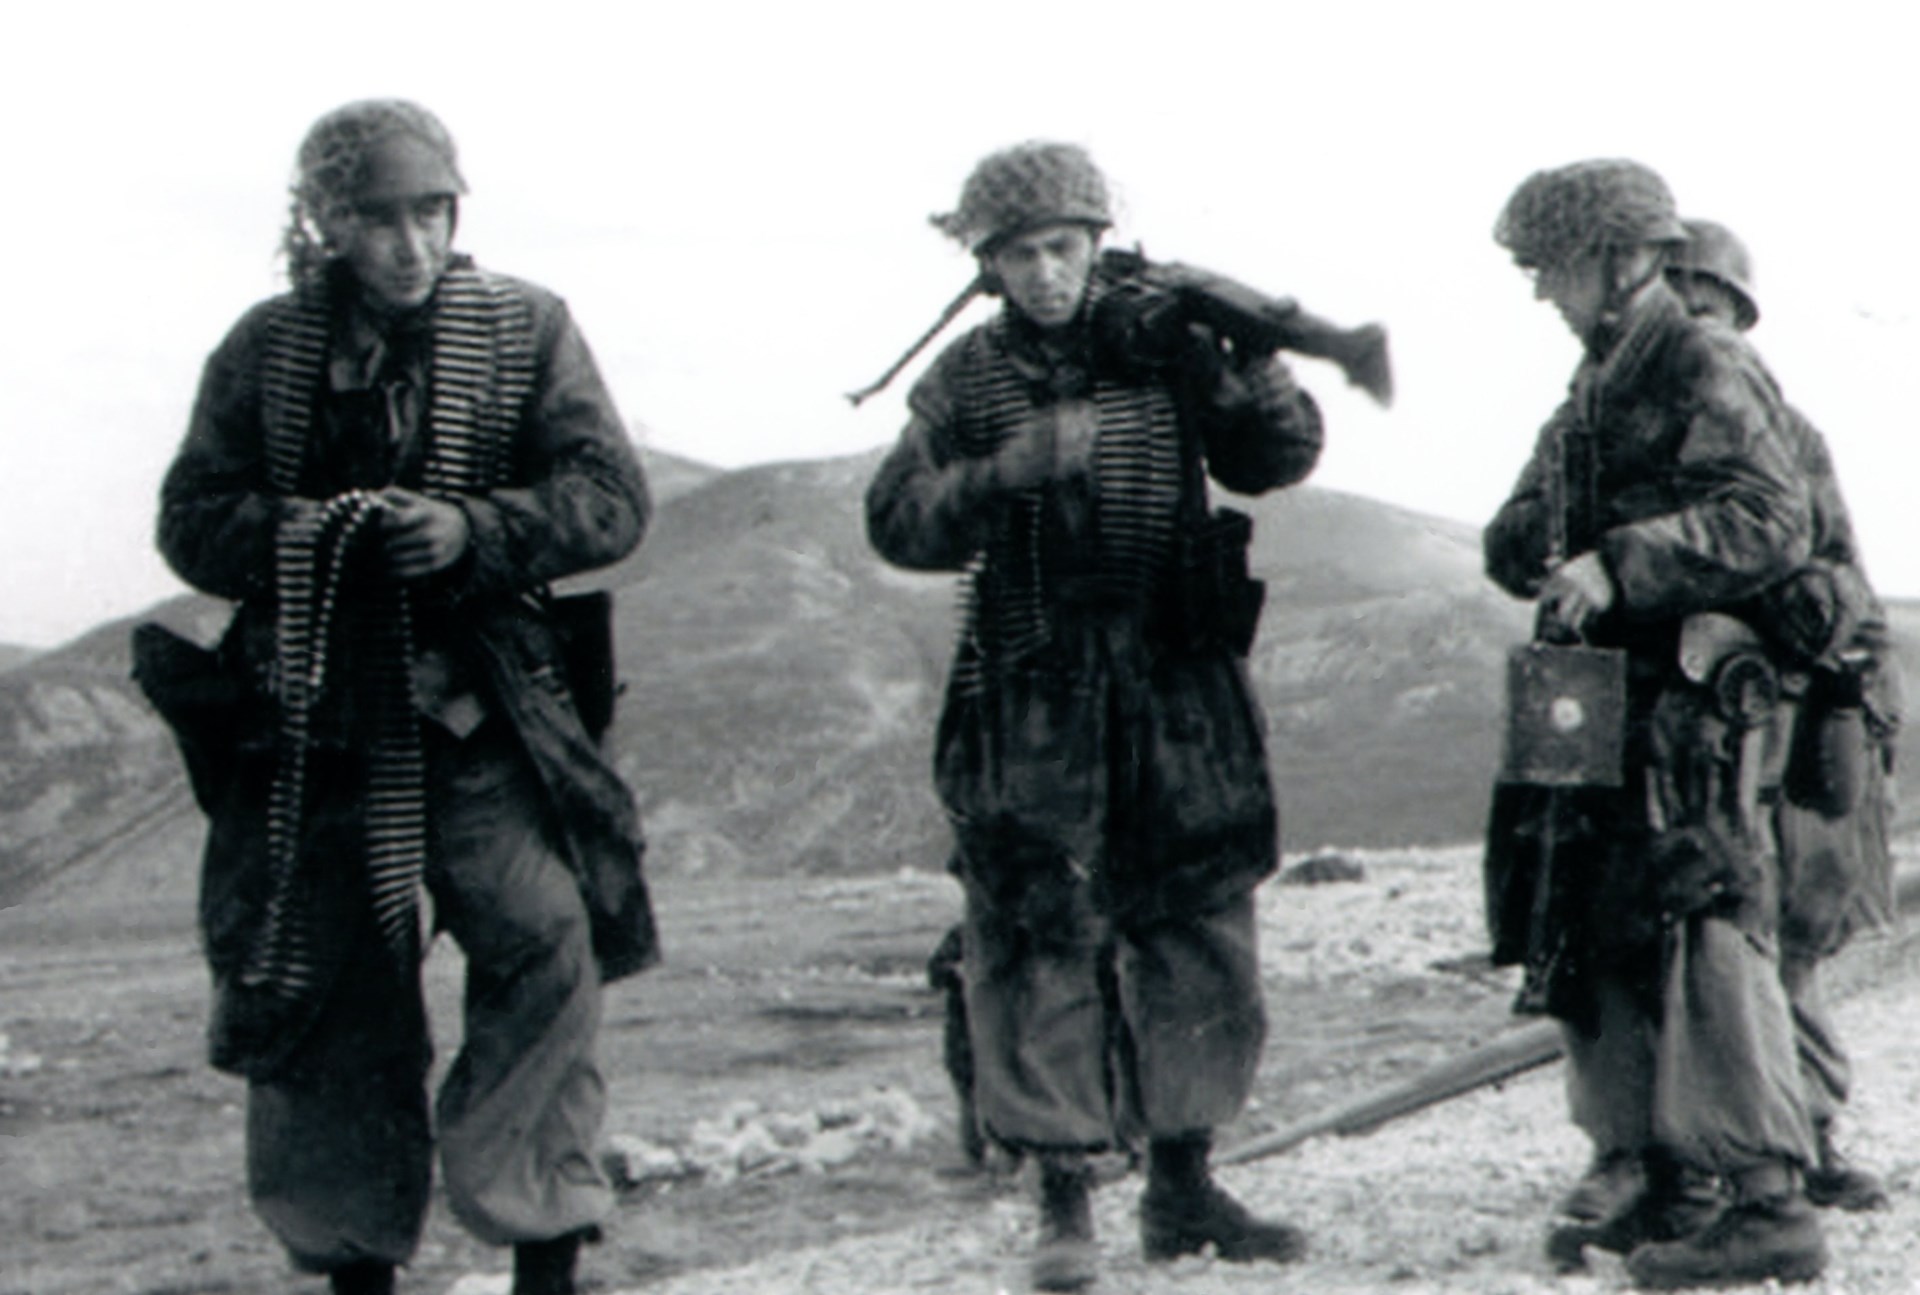 These Gran Sasso raiders carry plenty of ammunition for their MG42. Author’s collection